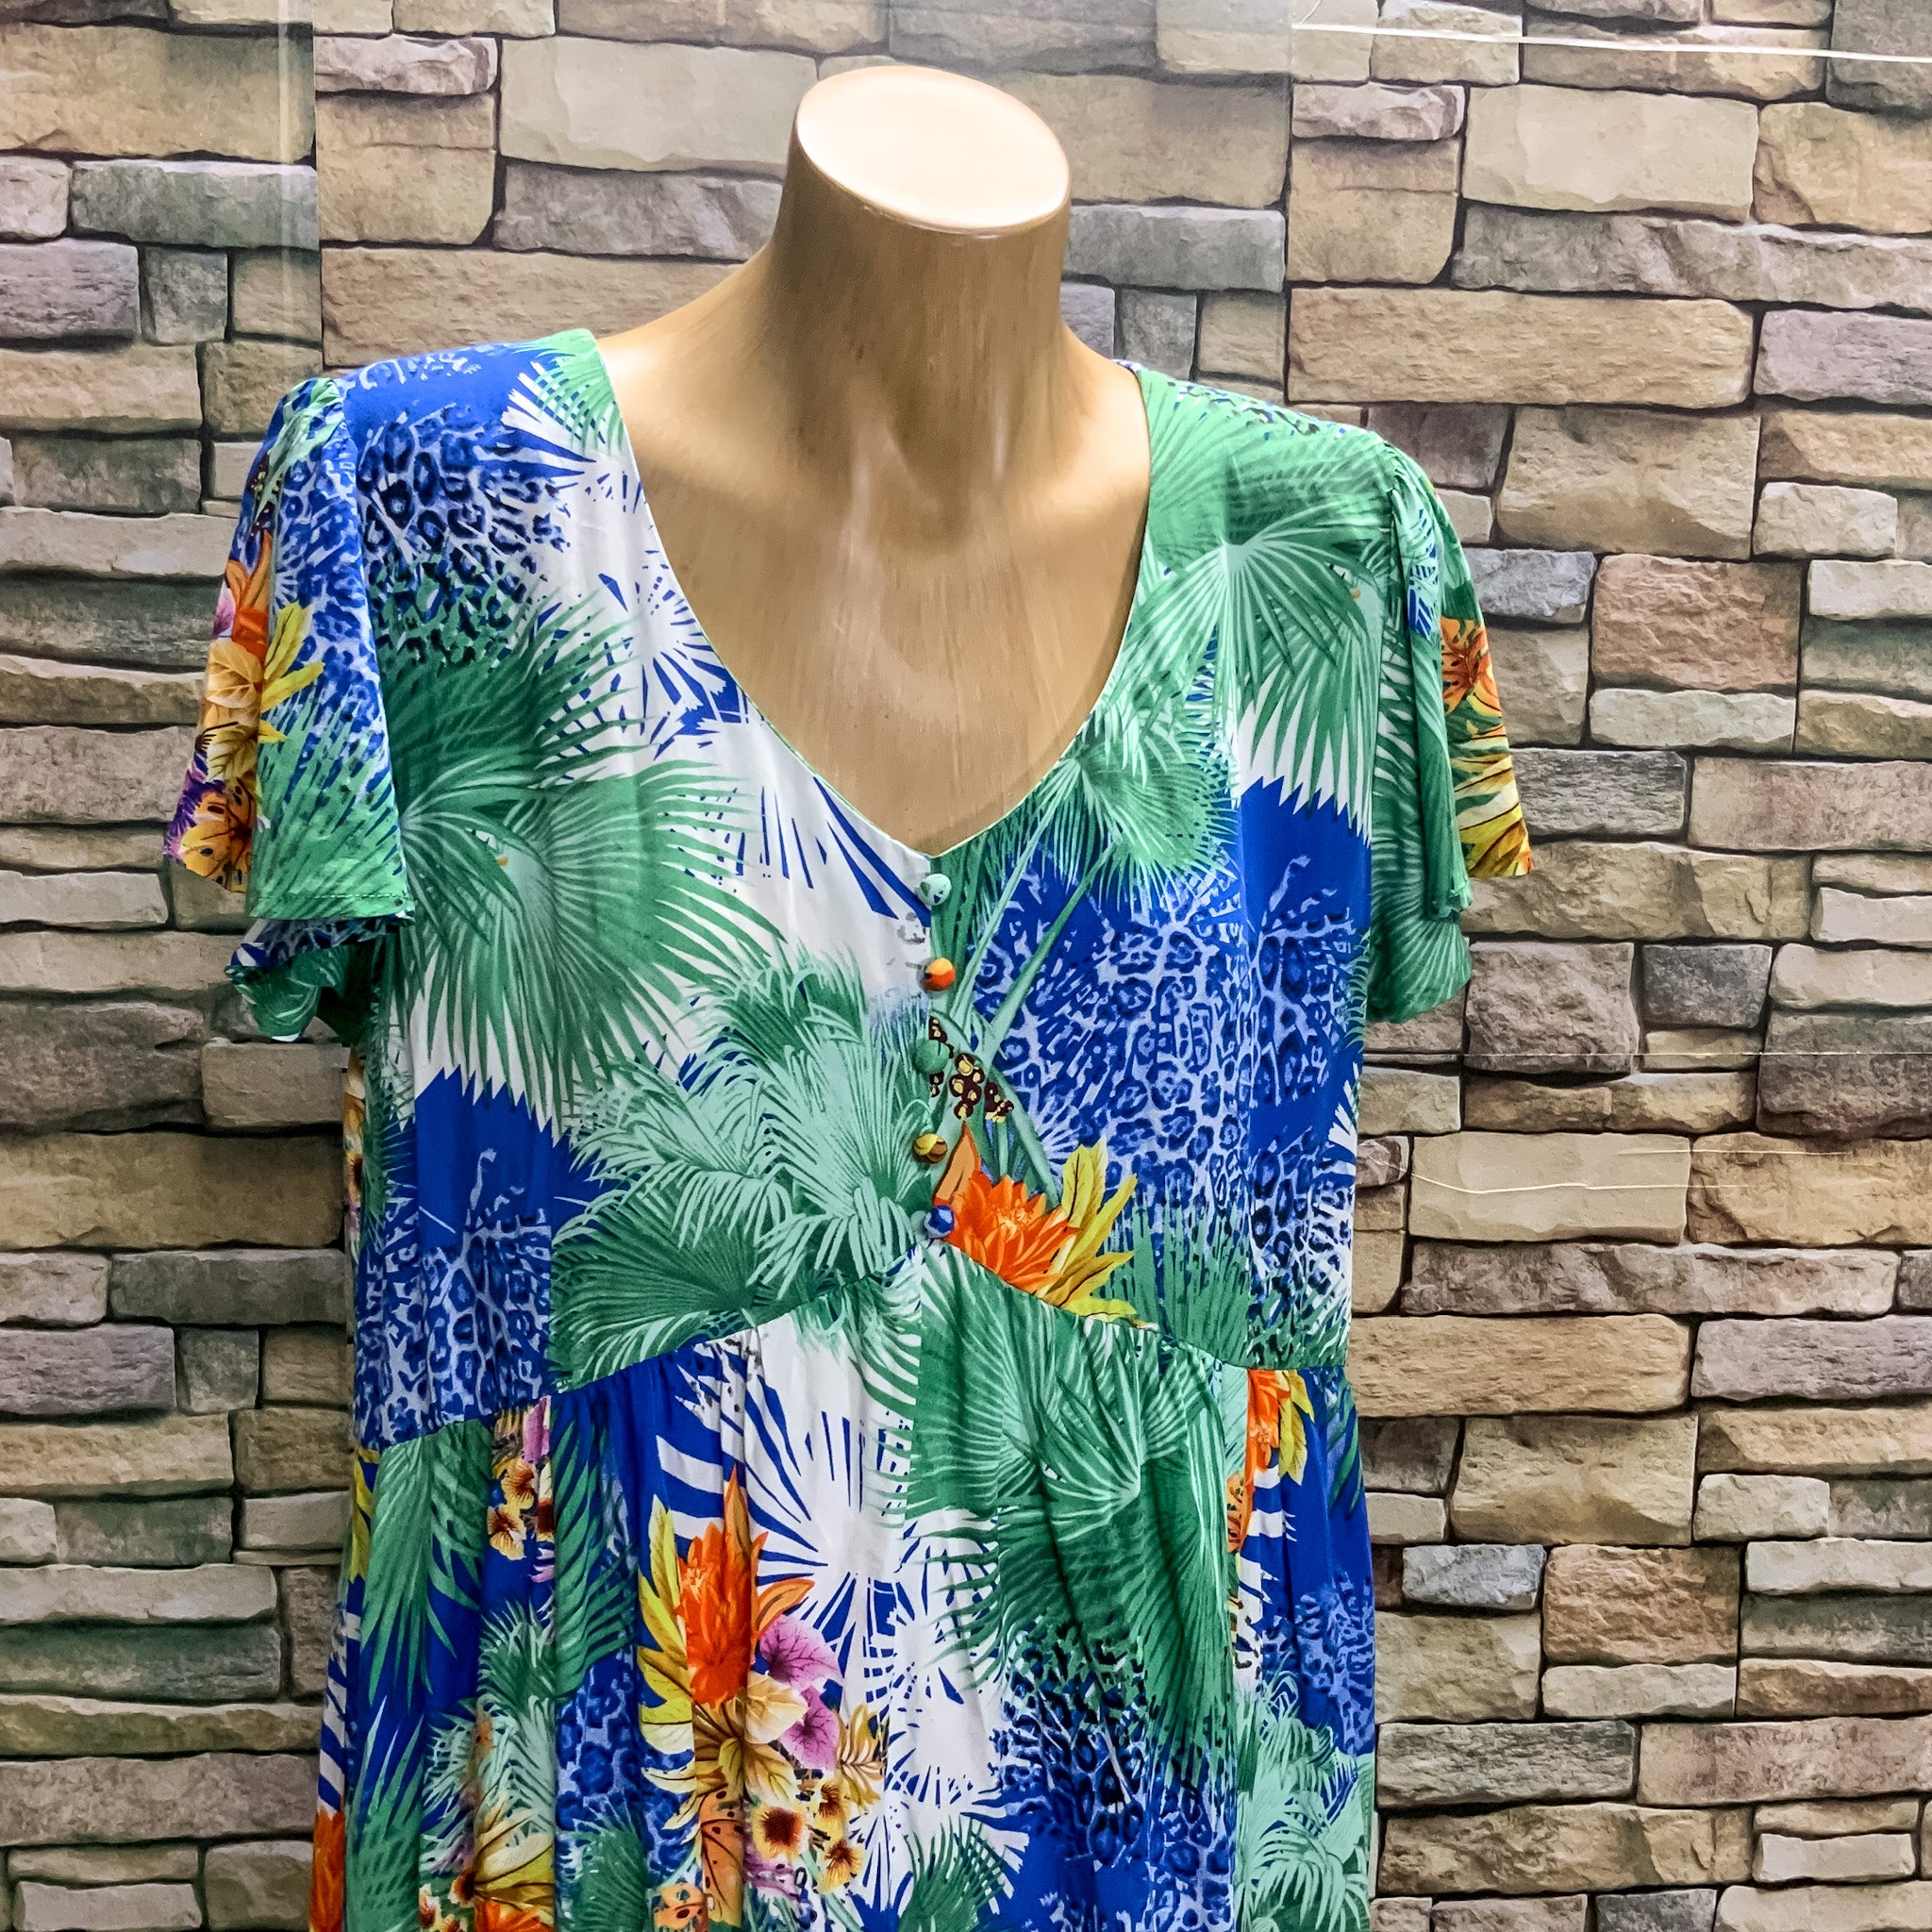 BNWT NEW COLLECTION Tropical Print Midi Dress - Size S